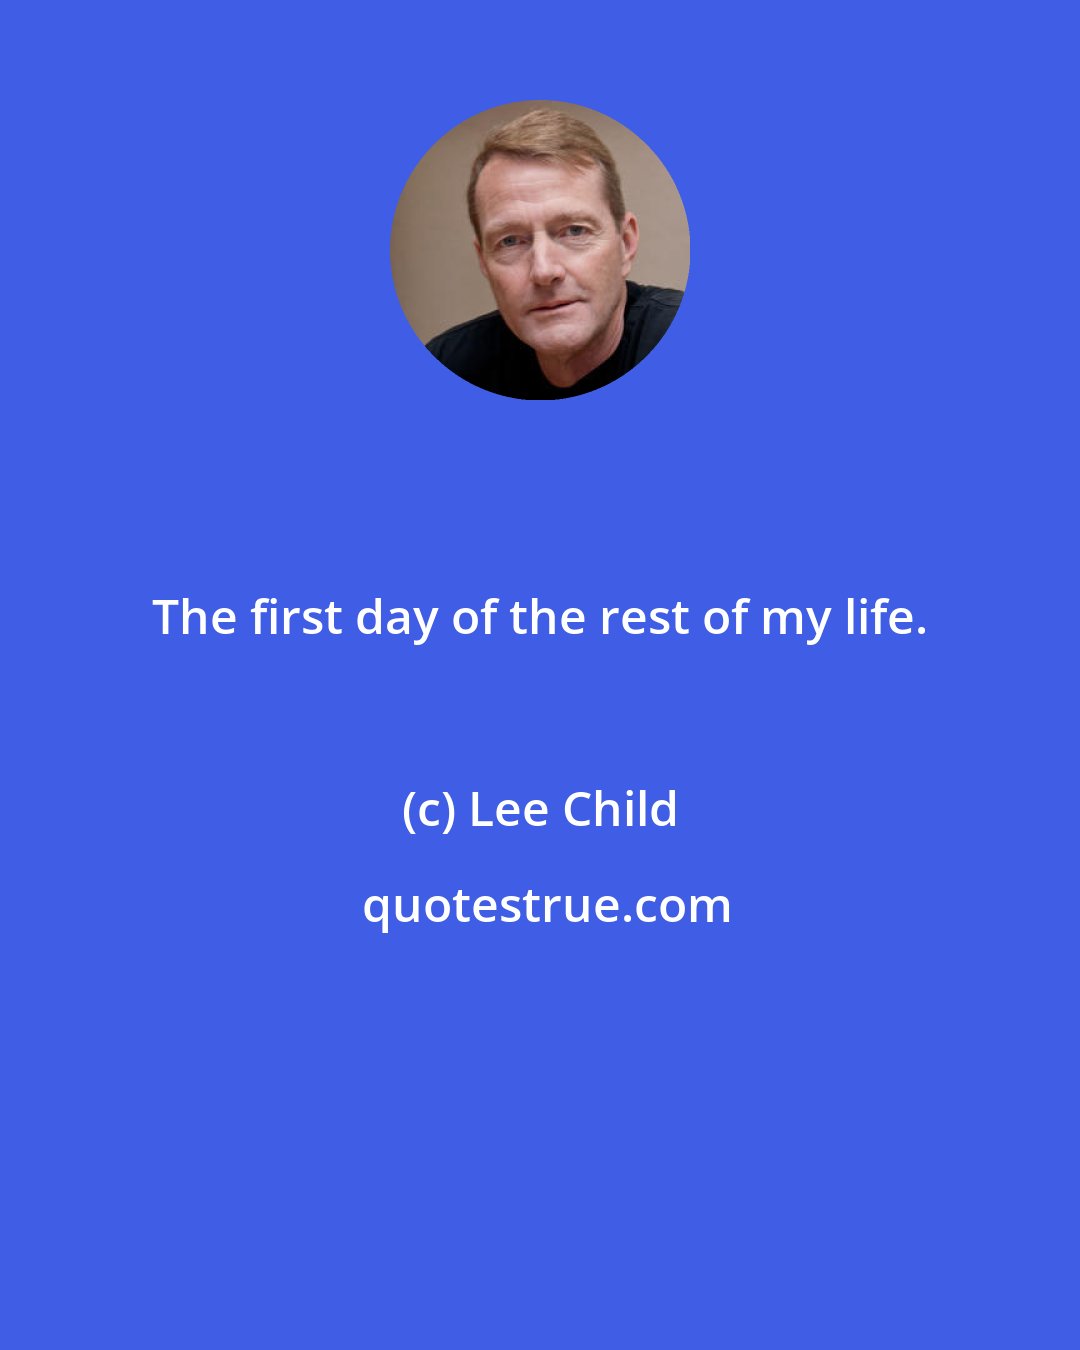 Lee Child: The first day of the rest of my life.